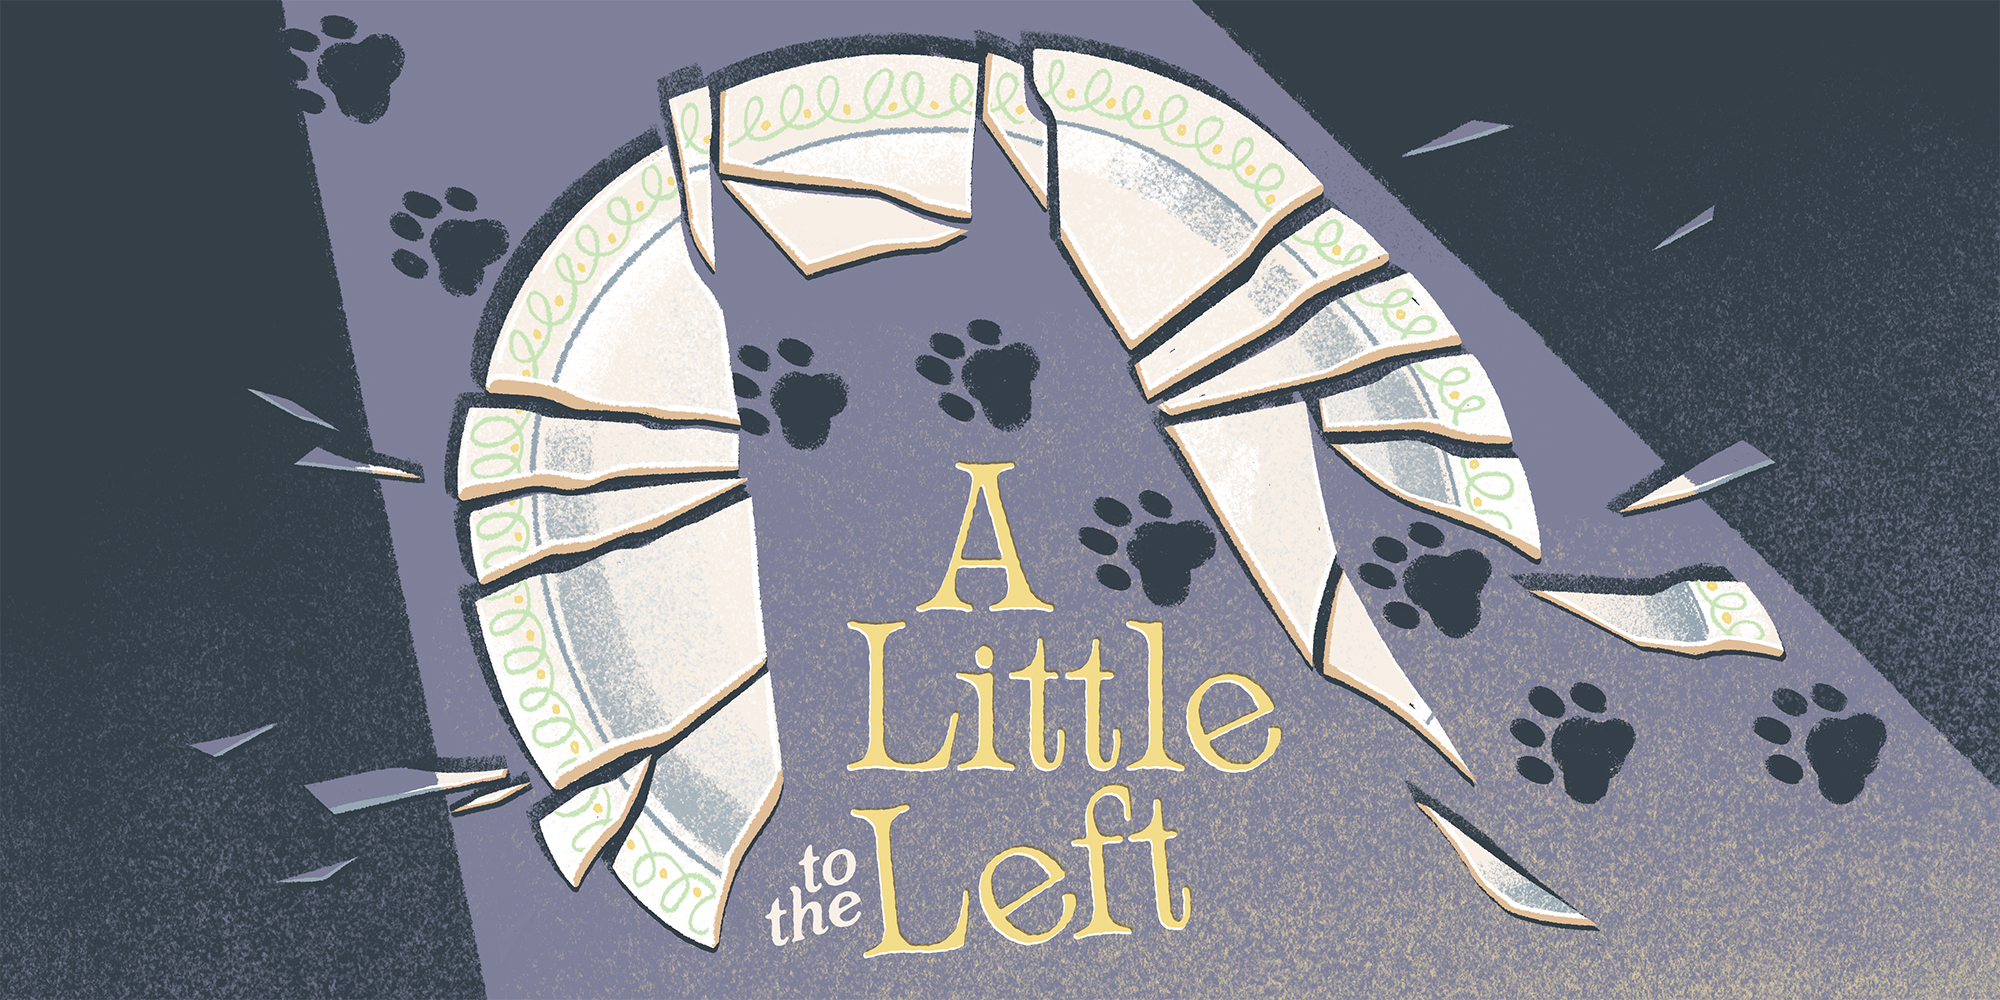 A Little to the Left PC Version Full Game Setup Free Download